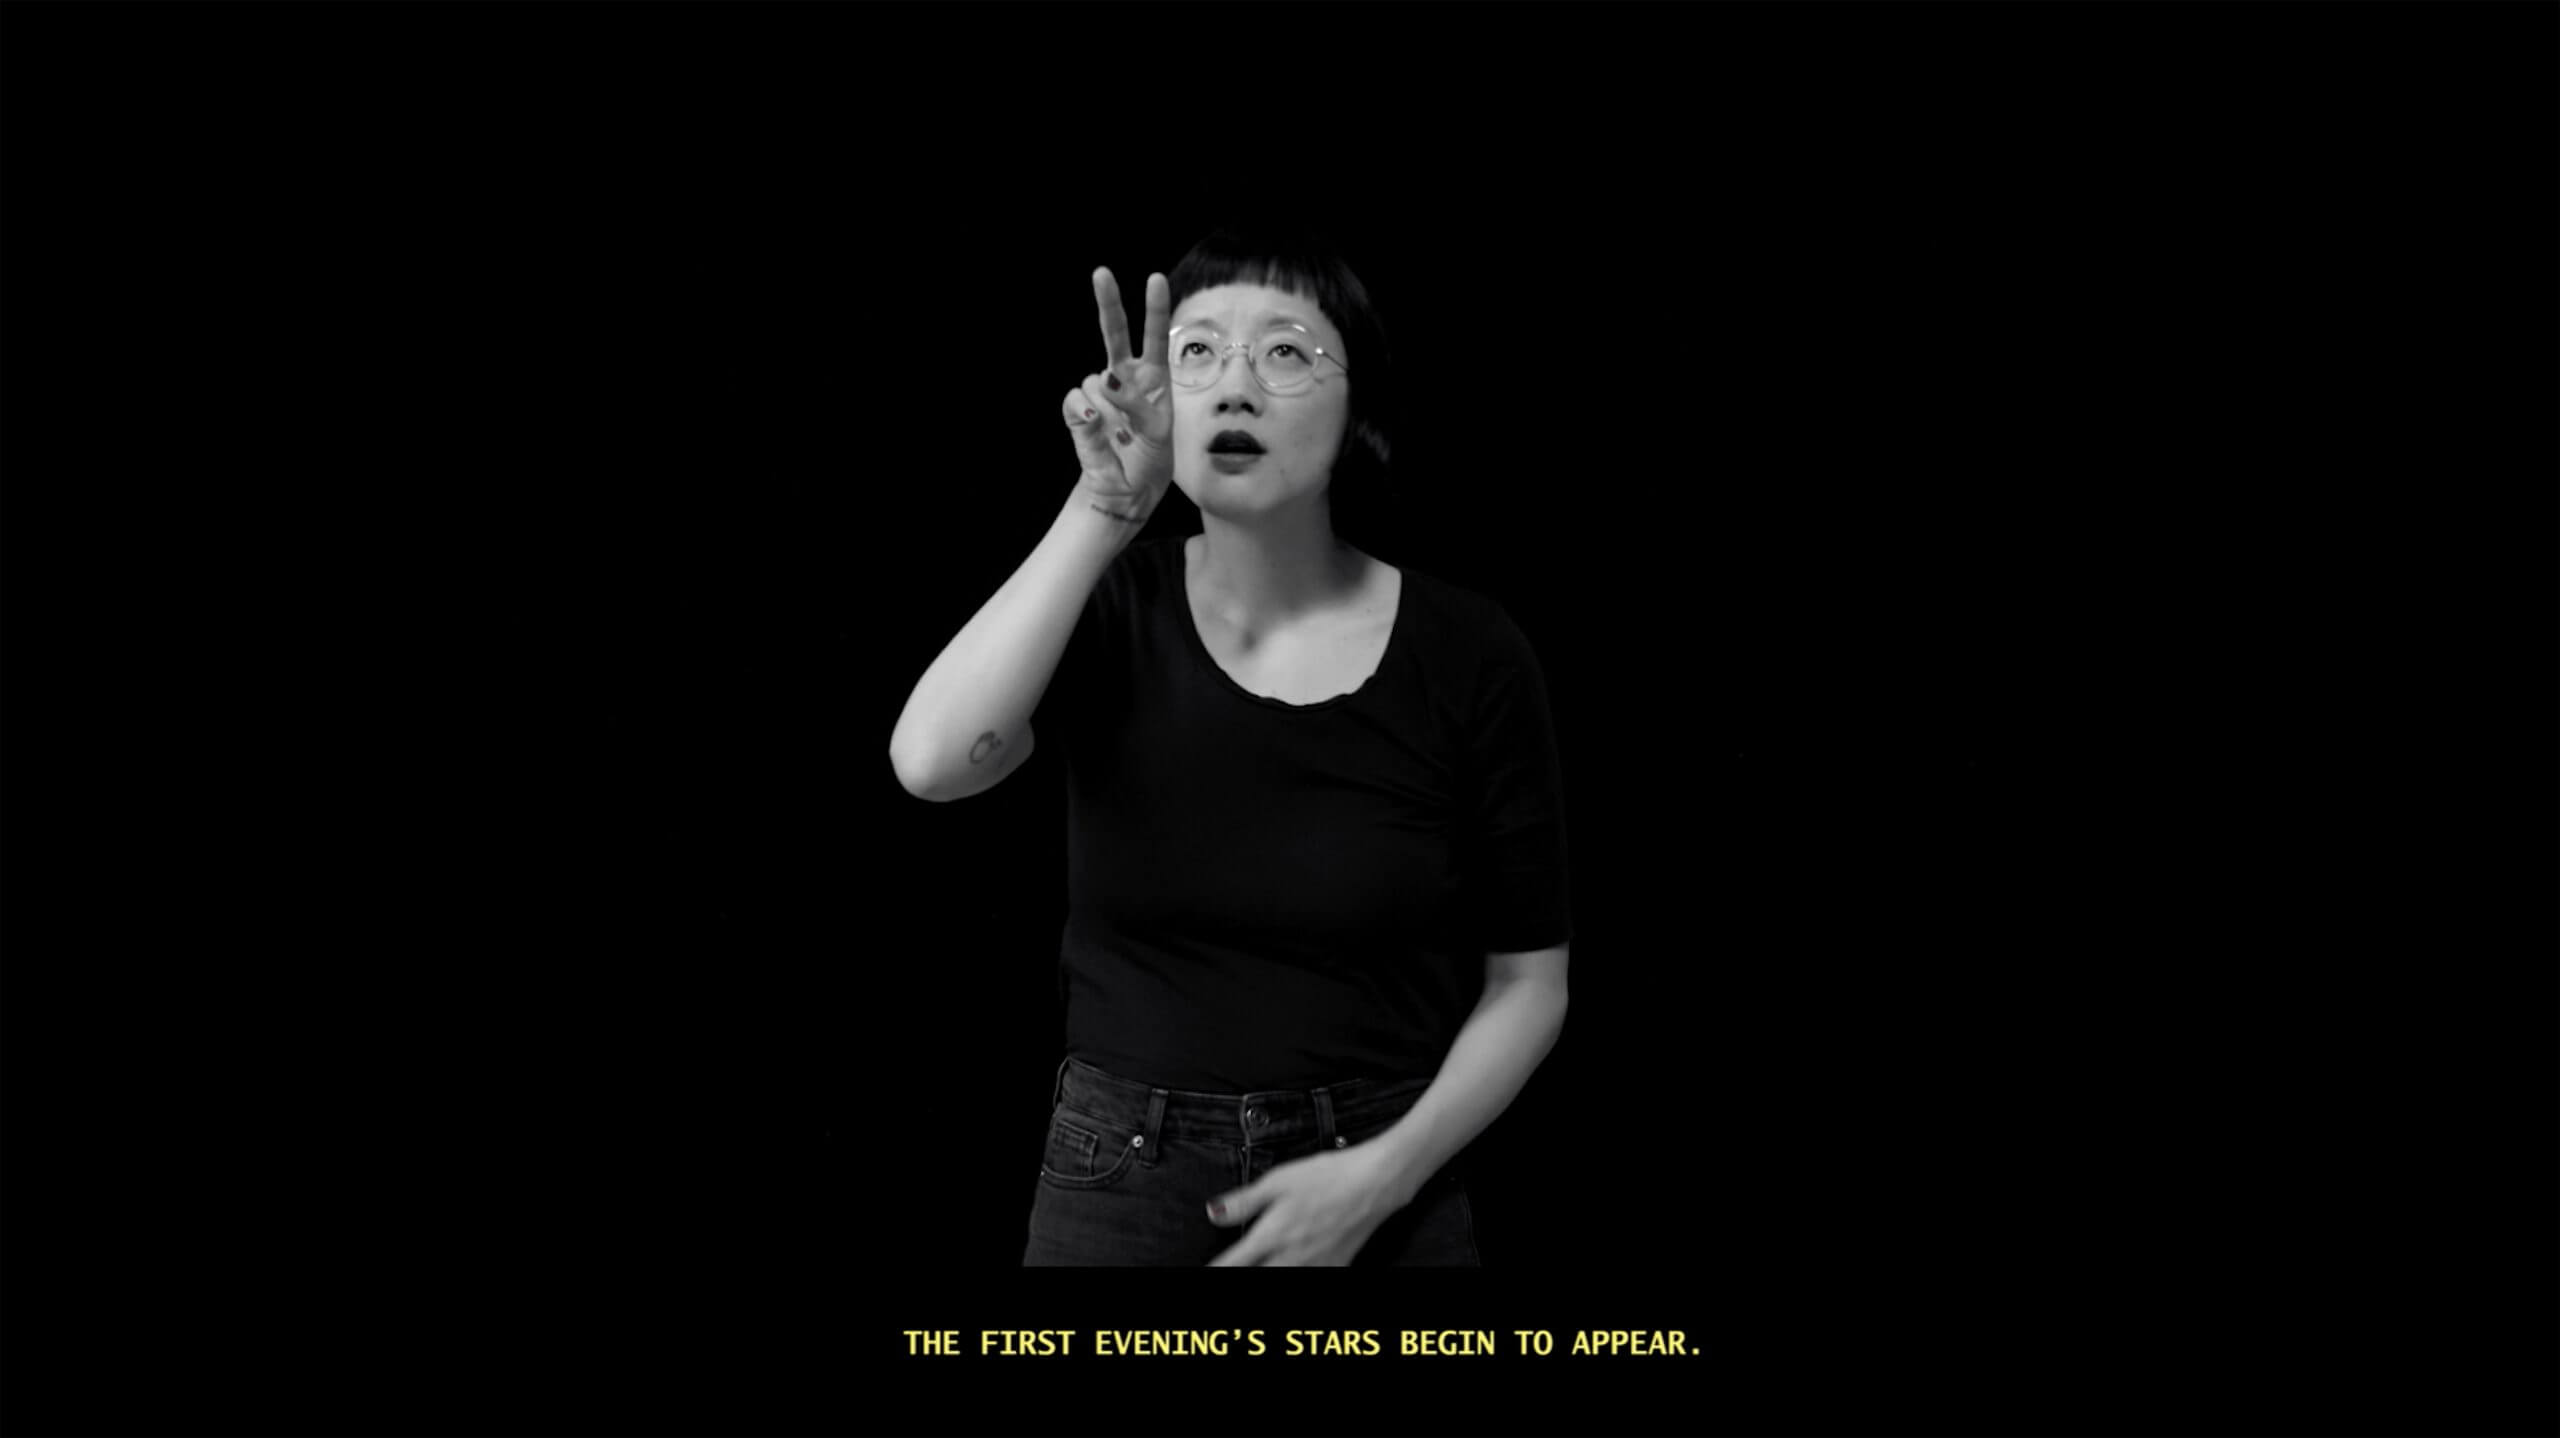 Still from The Tuba Thieves. A person looking up with their hand beside their face holding two fingers. Below them is a text that reads the first evening's stars begin to appear. Black and White photograph.